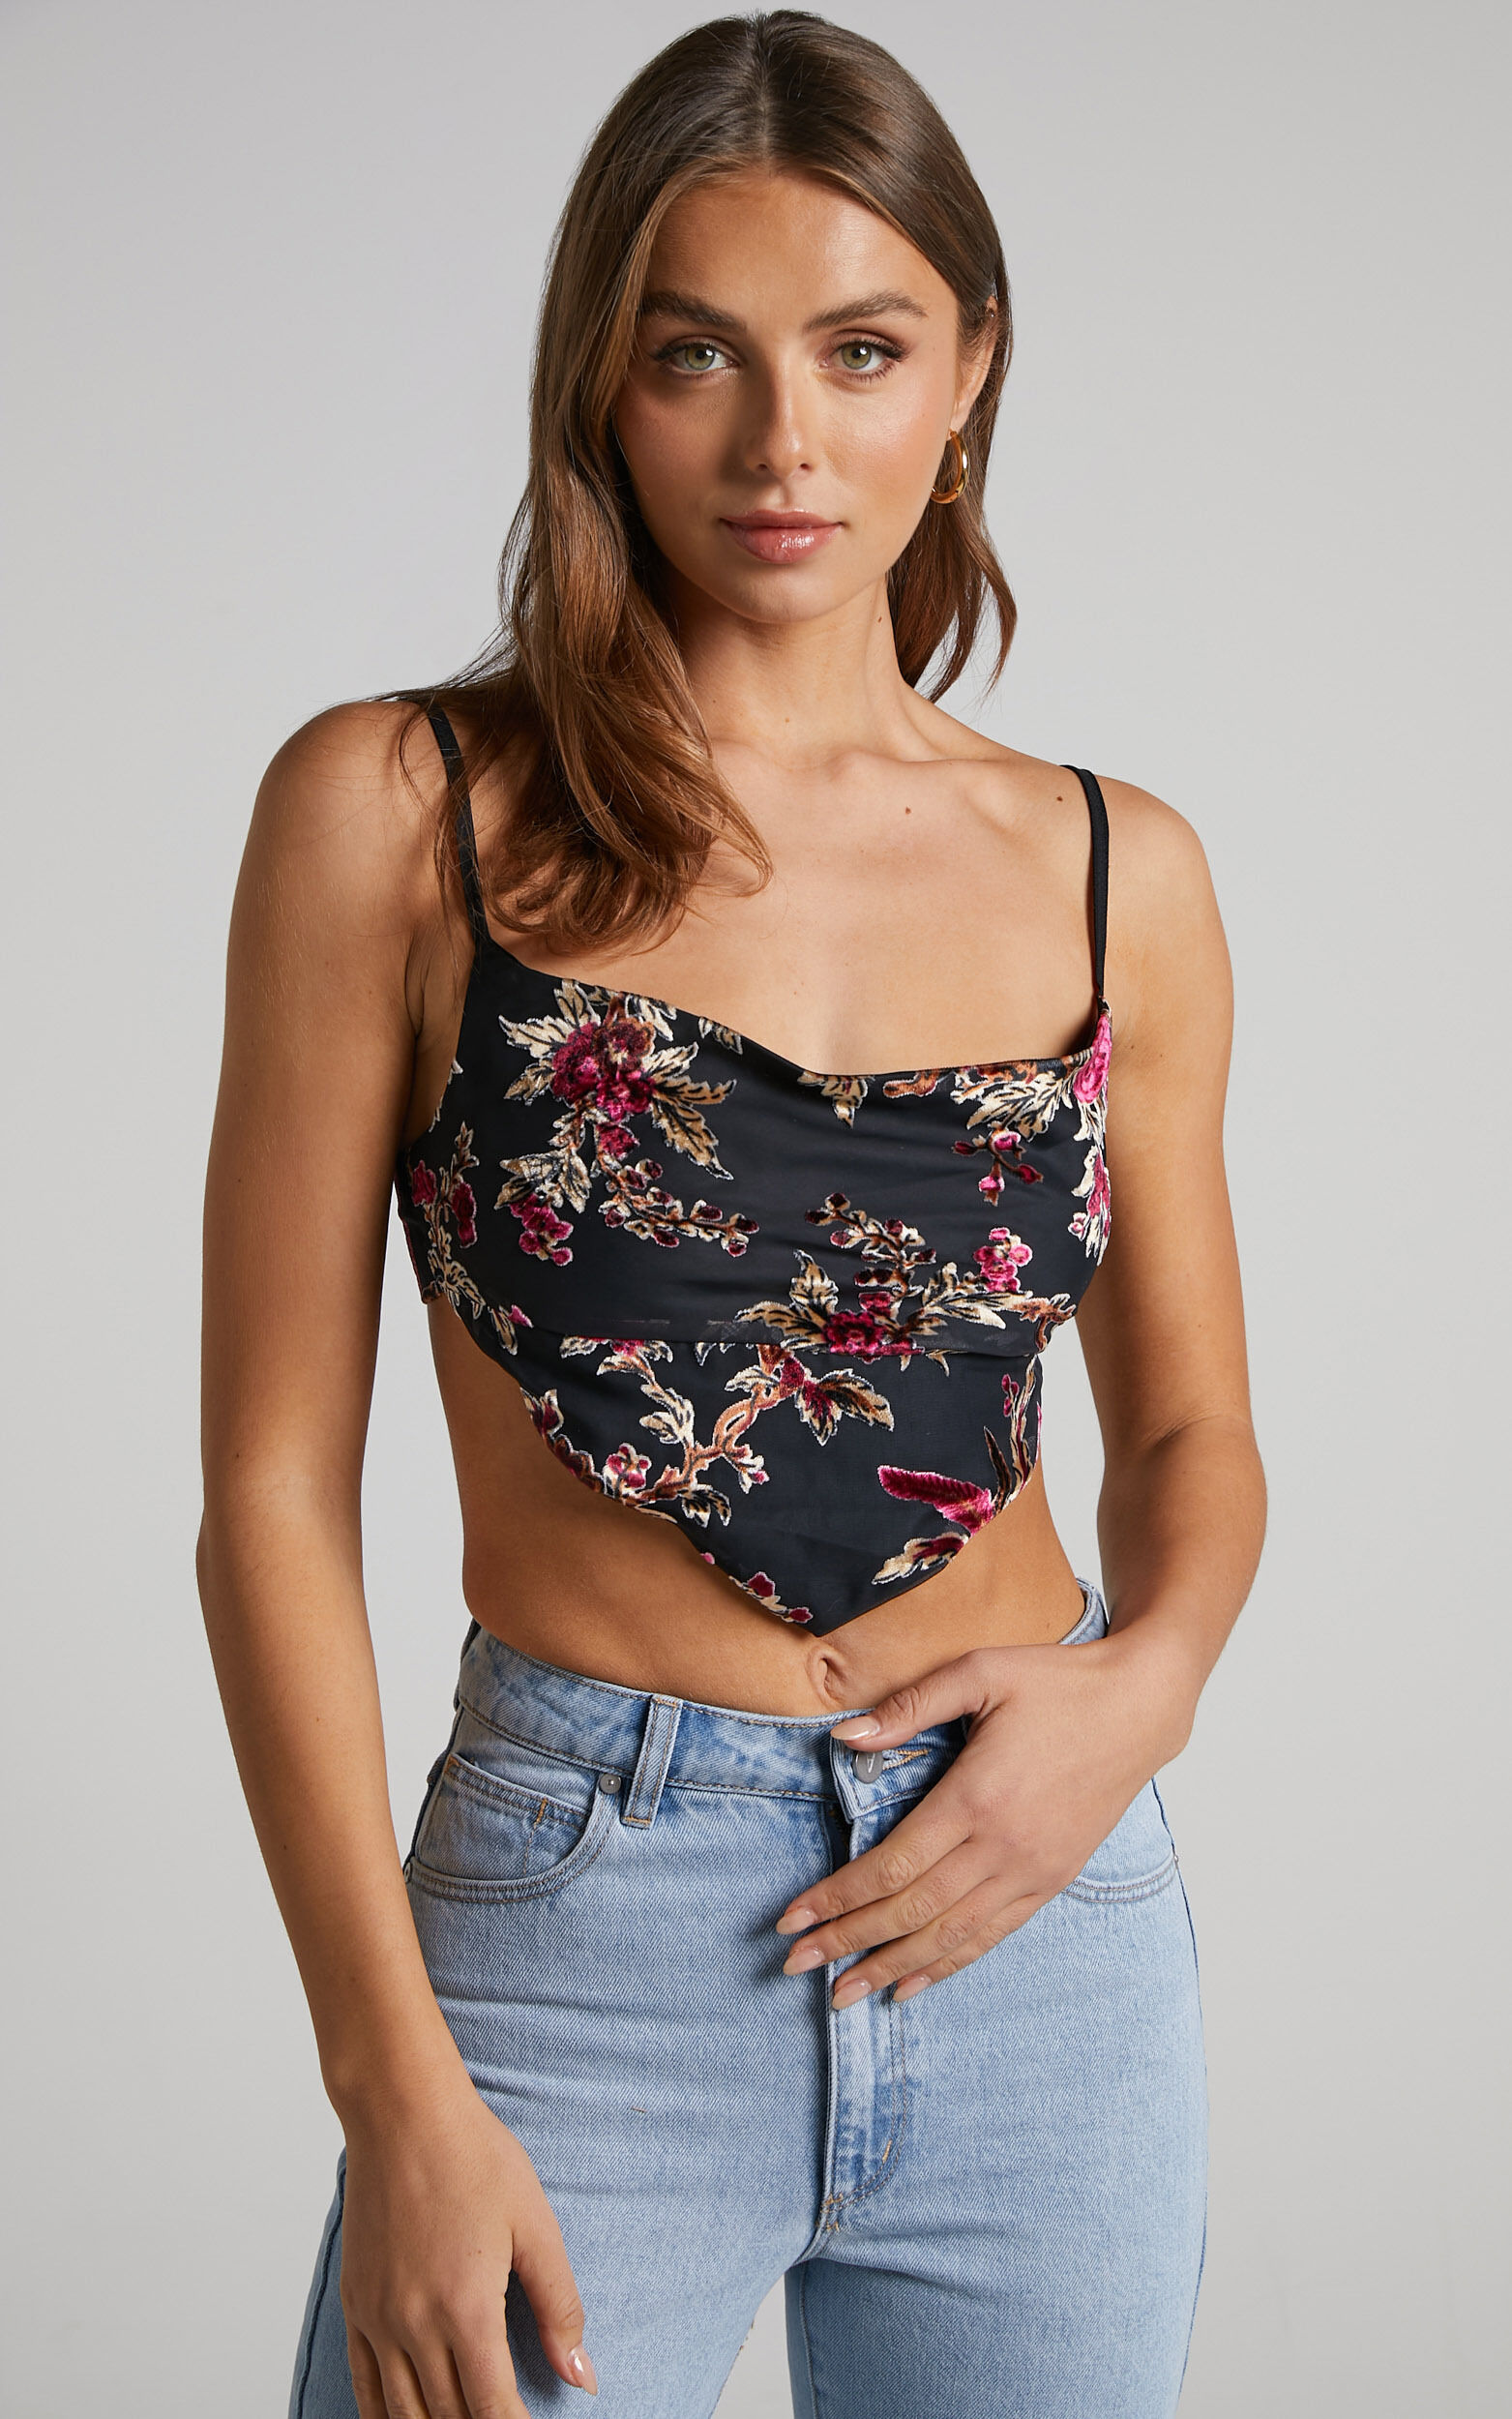 Jessell Top - Cowl Neck Bandana Cami in Black Floral - 06, BLK1